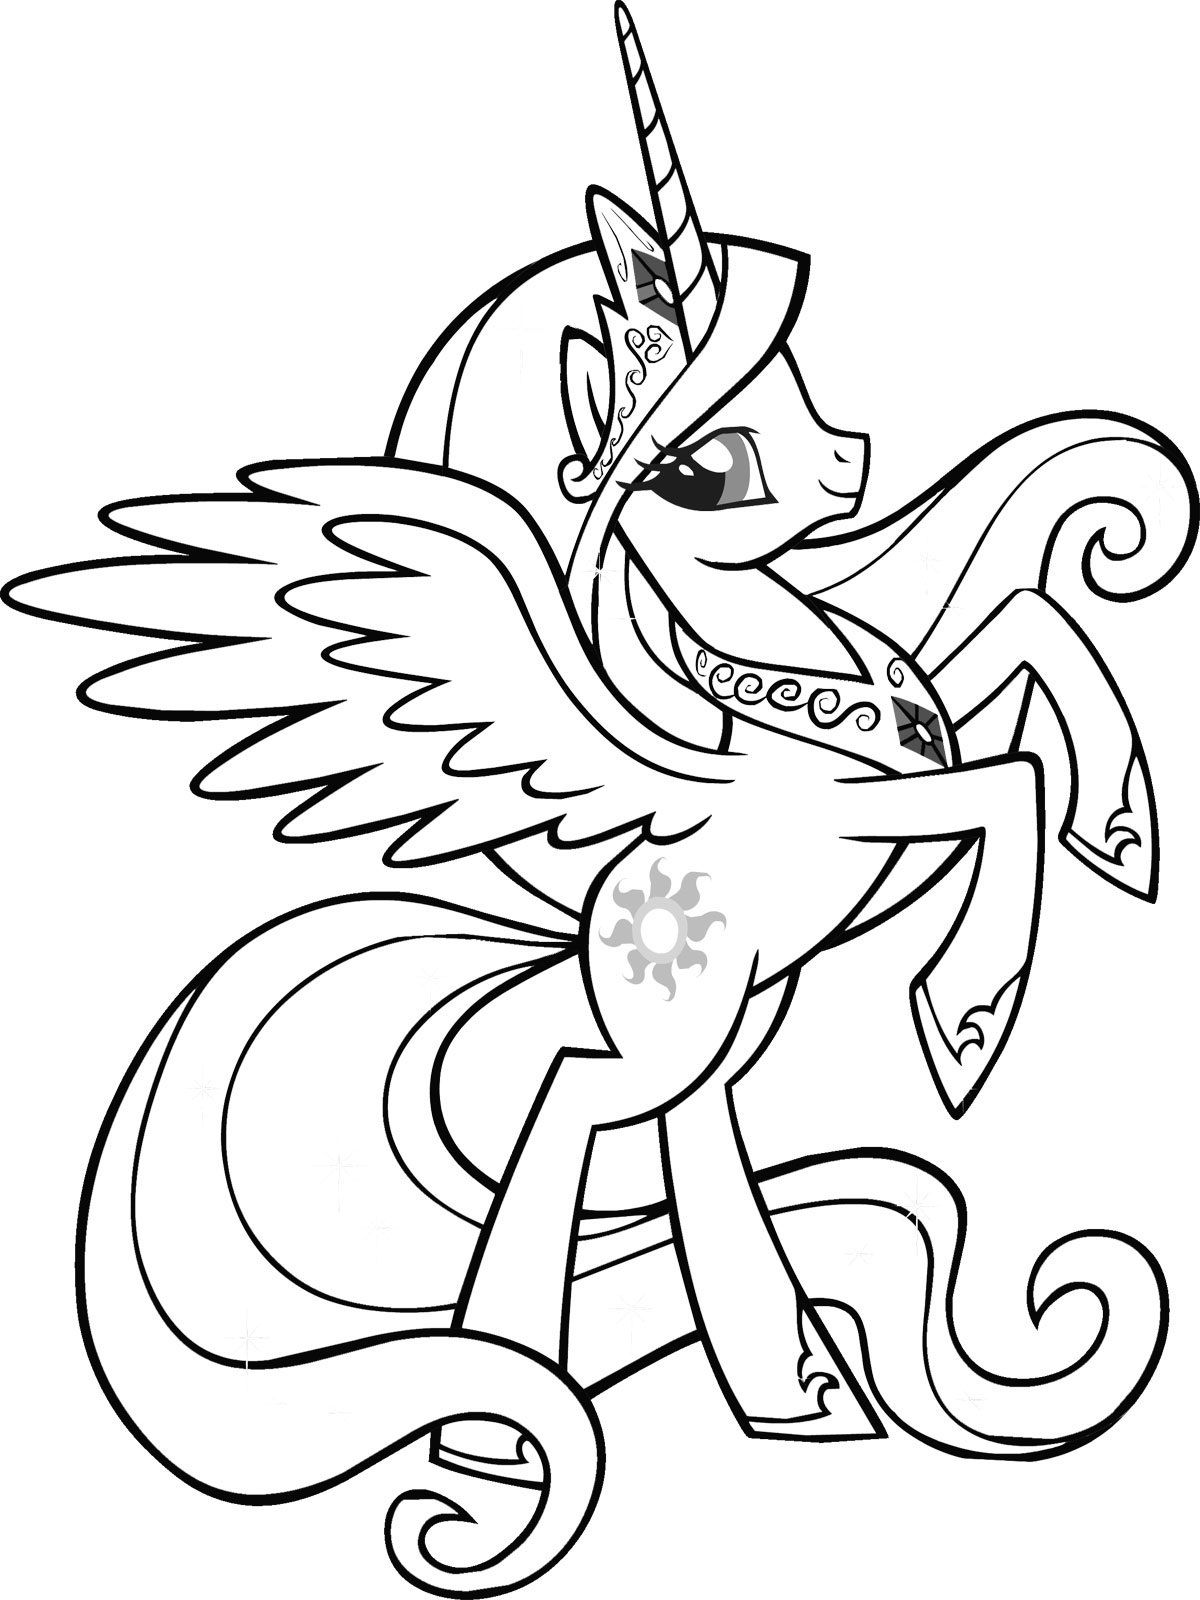 Free printable my little pony coloring pages for kids unicorn coloring pages my little pony coloring my little pony unicorn